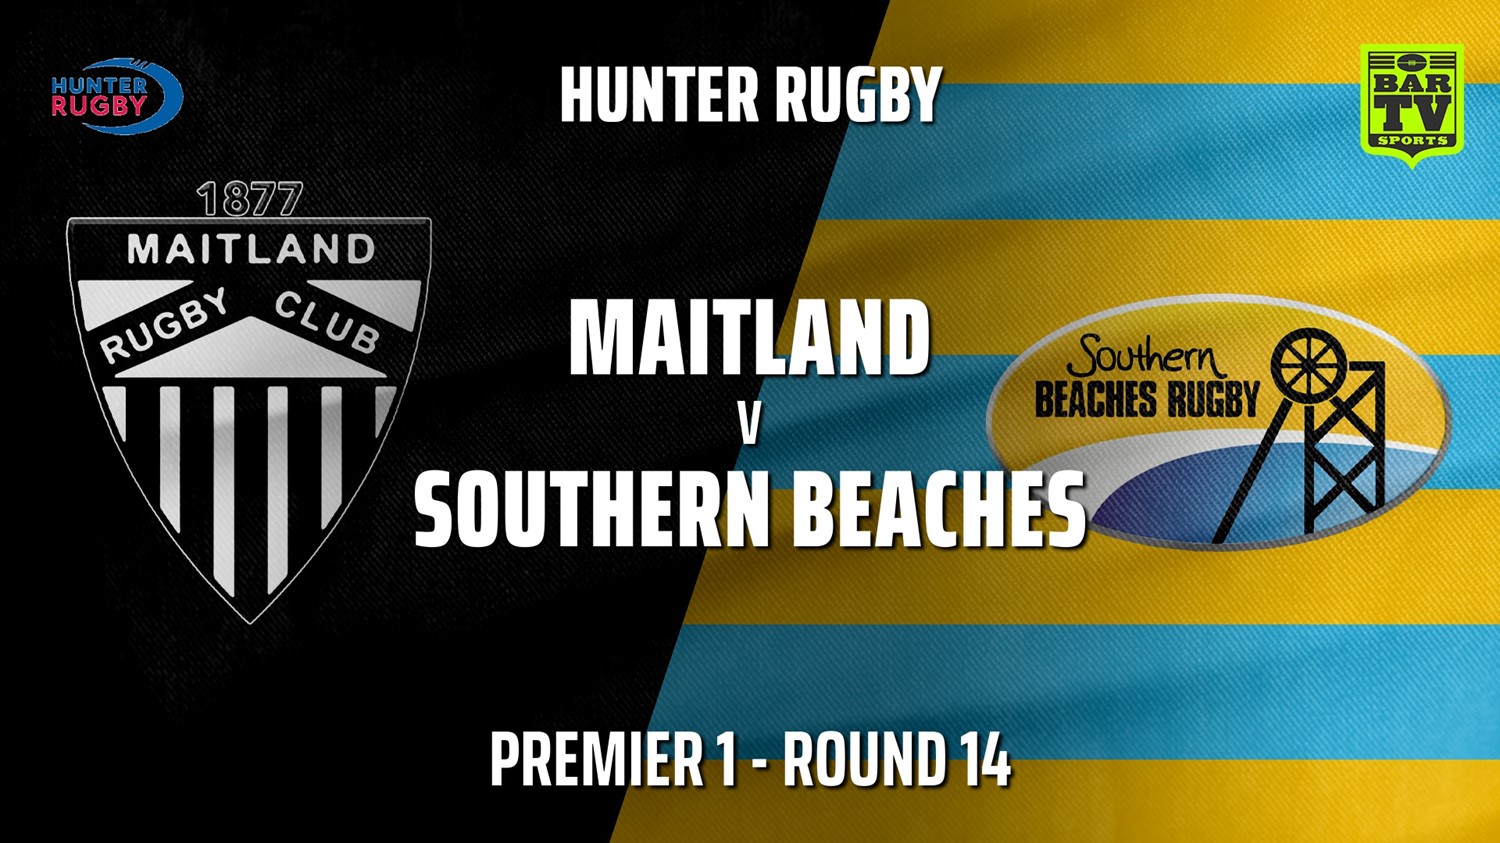 210724-Hunter Rugby Round 14 - Premier 1 - Maitland v Southern Beaches Minigame Slate Image